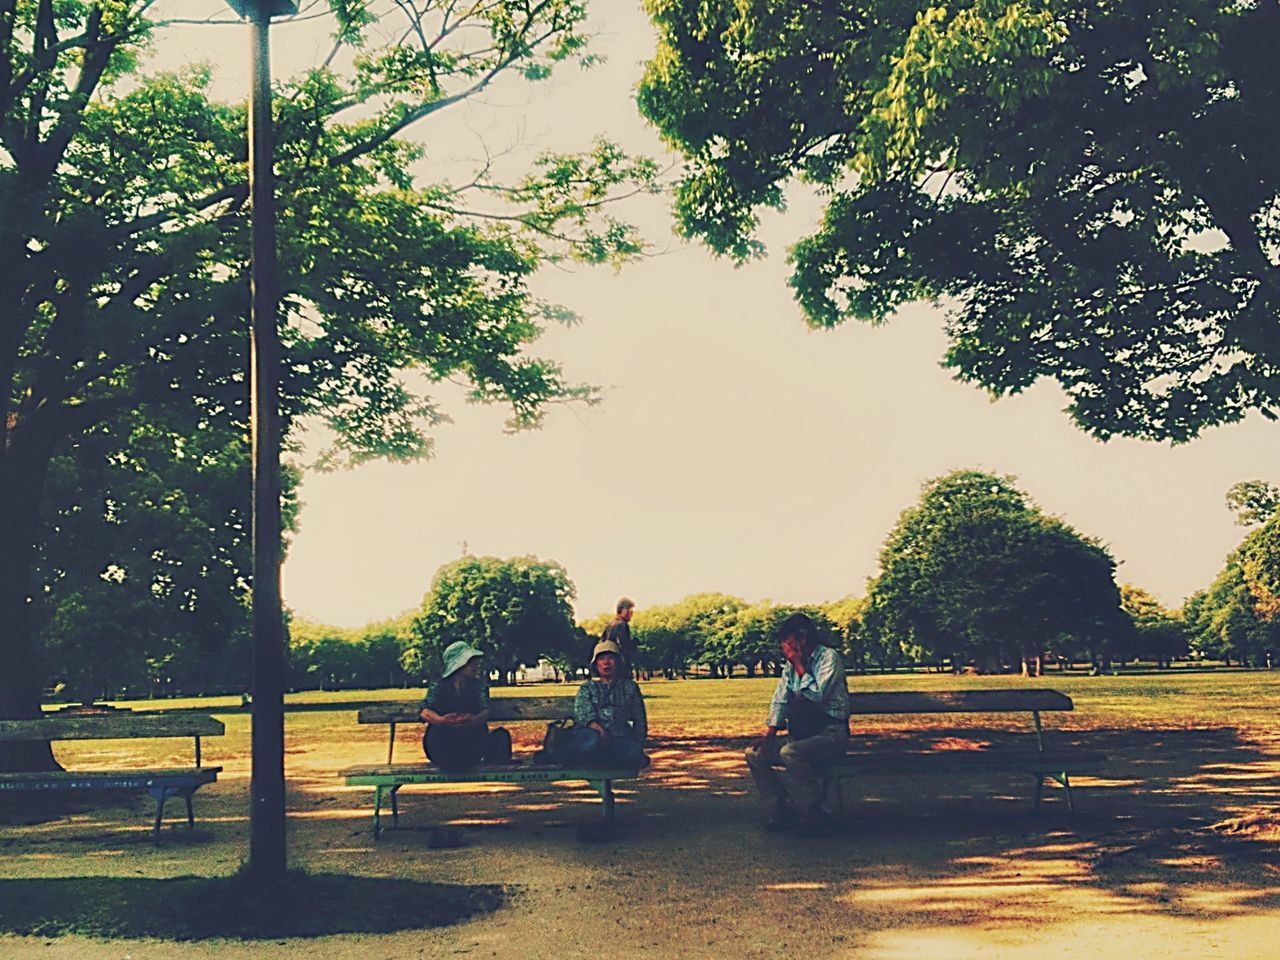 tree, park - man made space, bench, clear sky, park, park bench, sunlight, grass, tranquility, growth, nature, footpath, tranquil scene, day, empty, sitting, incidental people, outdoors, relaxation